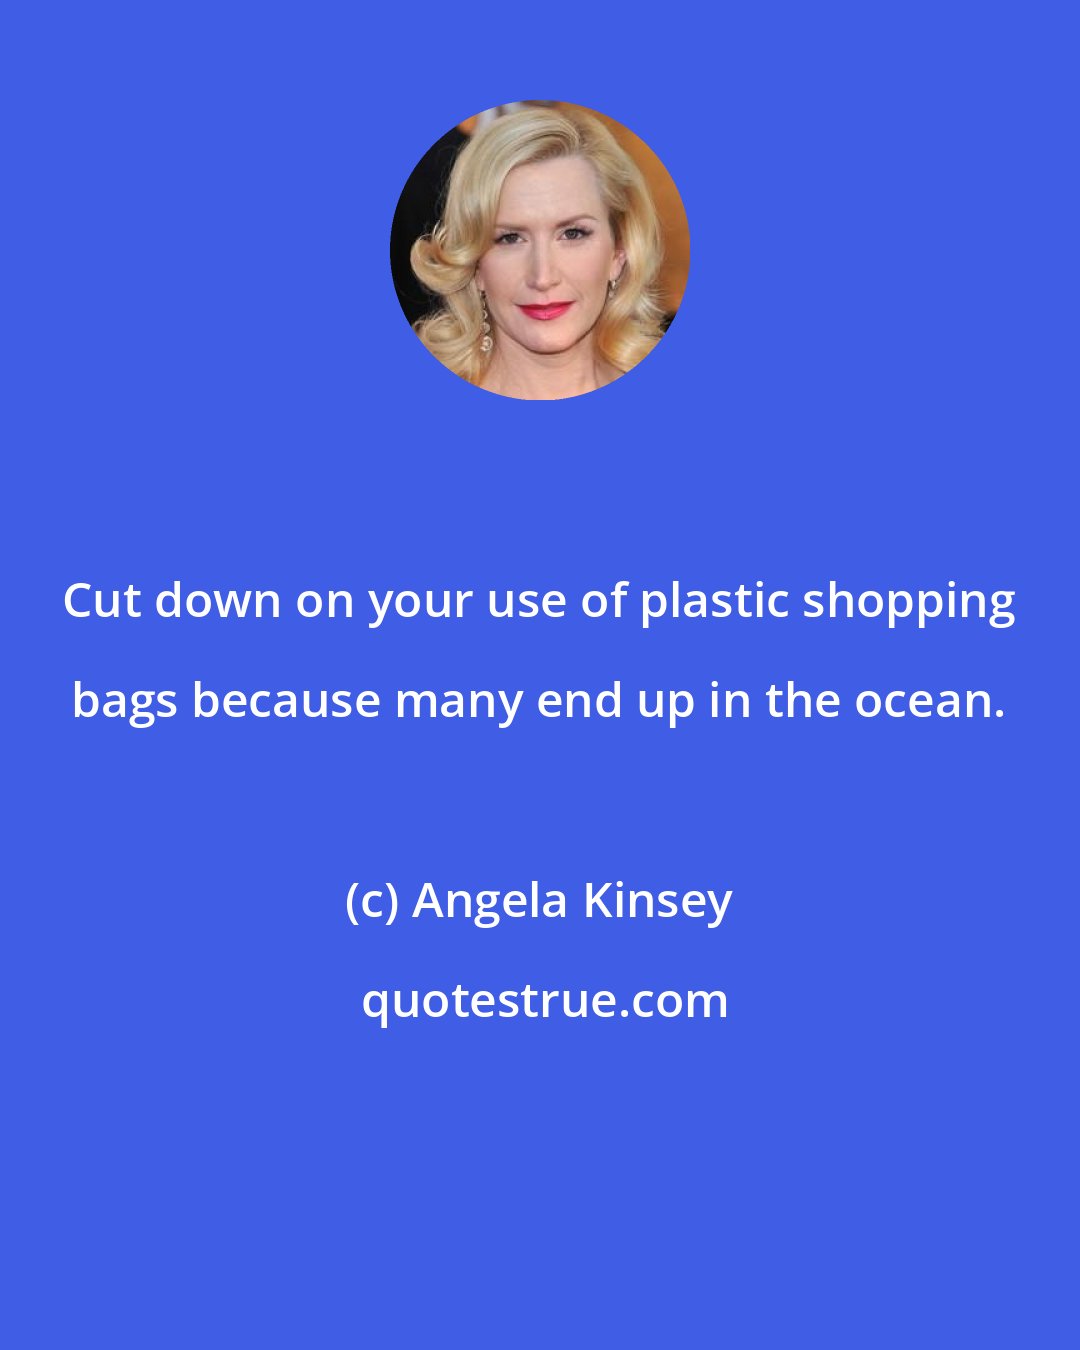 Angela Kinsey: Cut down on your use of plastic shopping bags because many end up in the ocean.